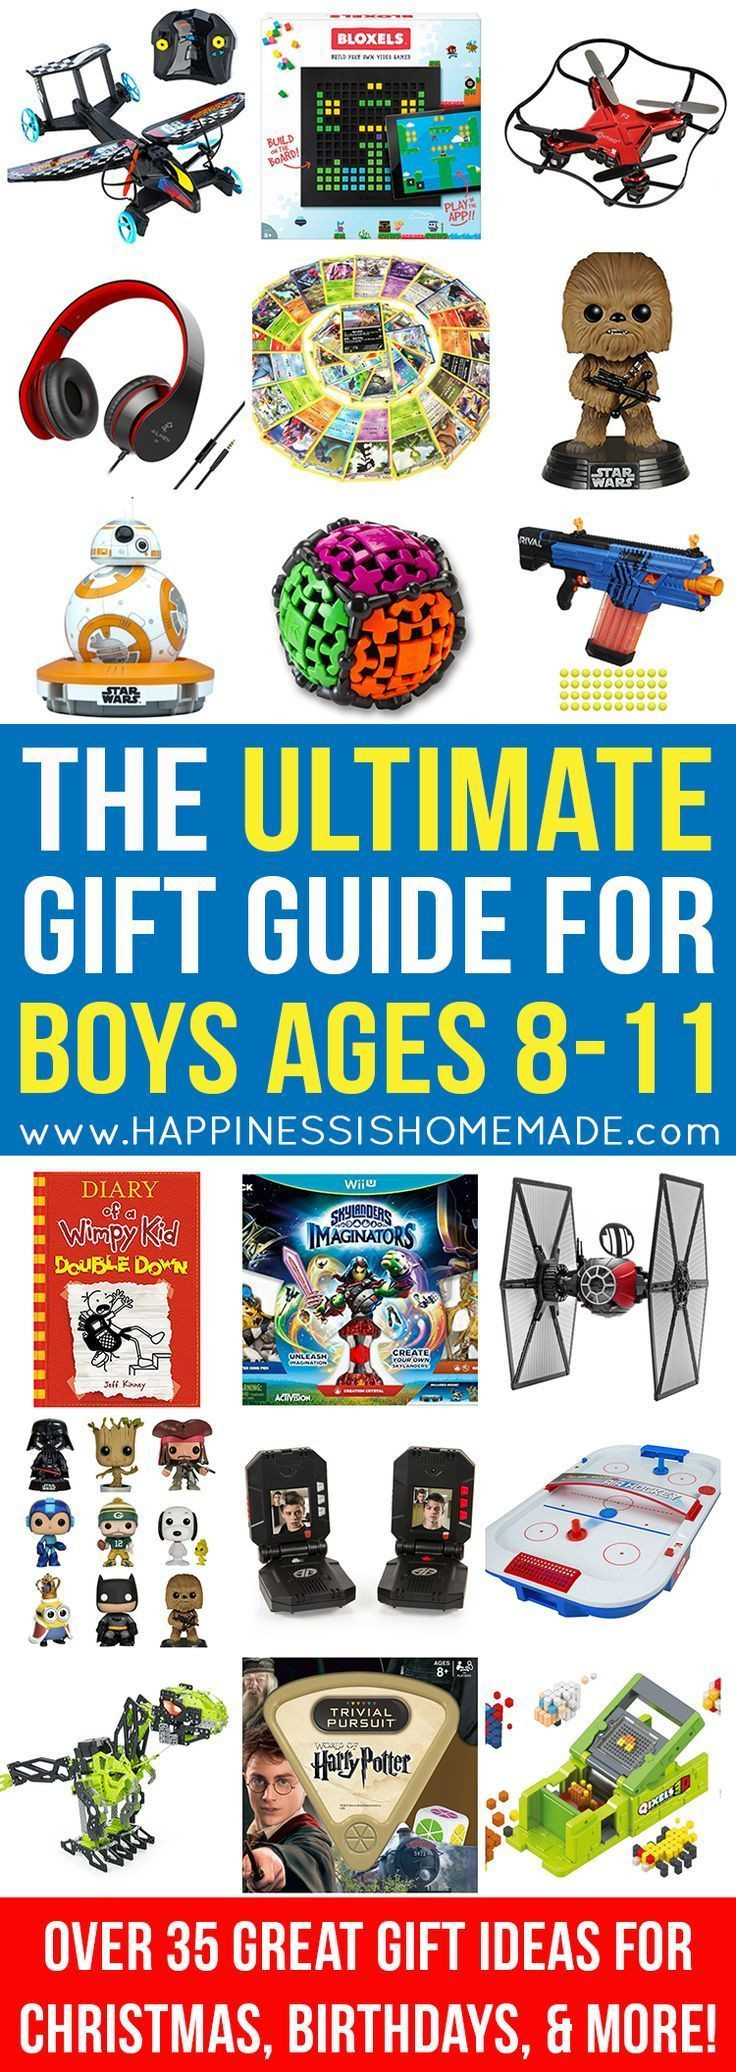 Christmas Gift Ideas For 8 Year Old Boy
 10 images about Best Toys for 9 Year Old Boys on